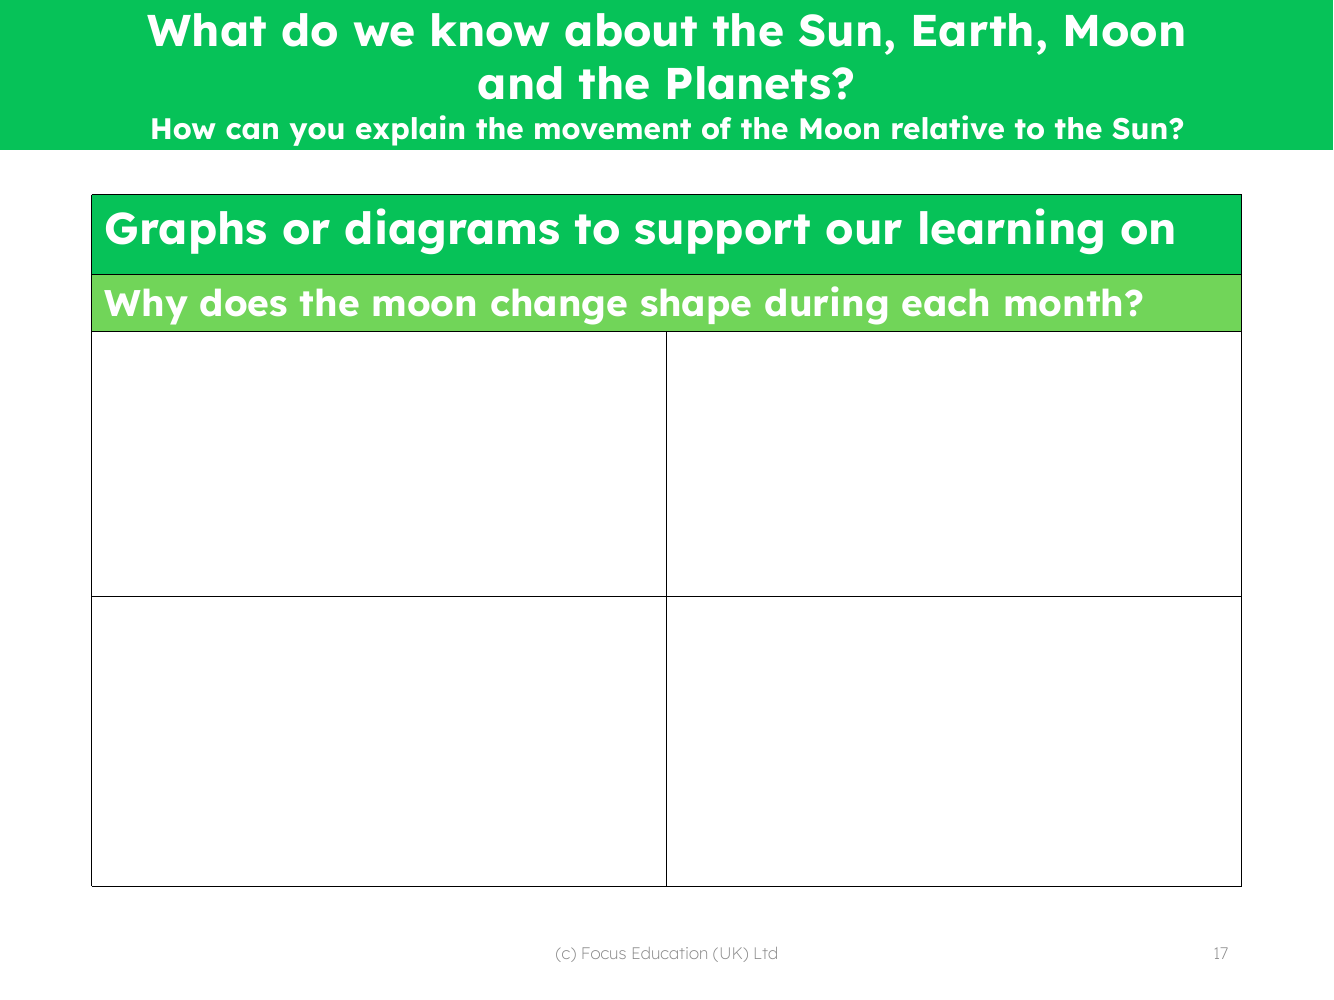 The movement of the Moon relative to the Sun - Graphs and diagrams sheet